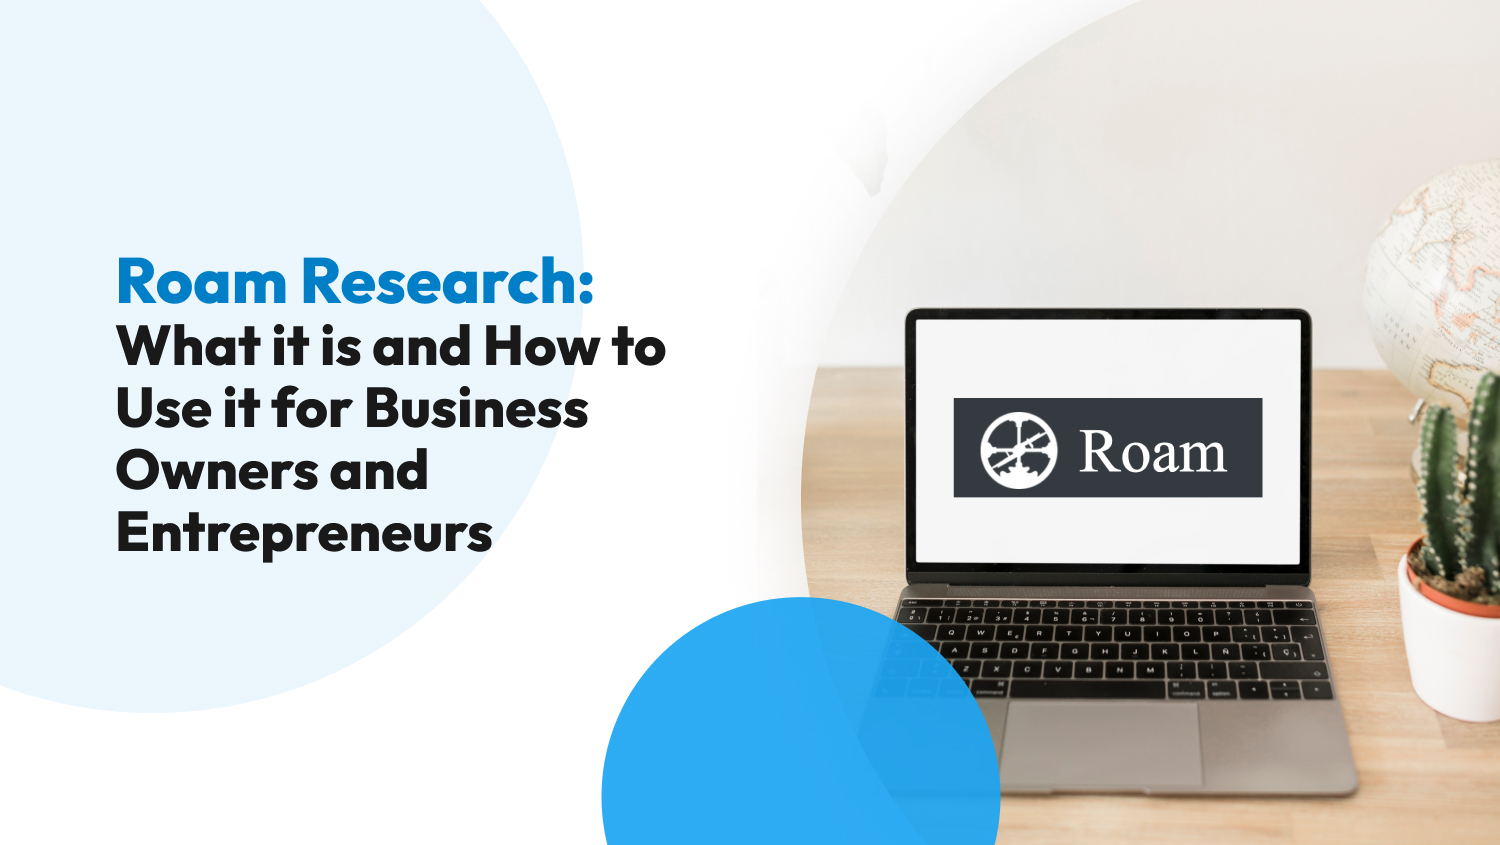 Roam Research: What it is and How to Use it for Business Owners and Entrepreneurs